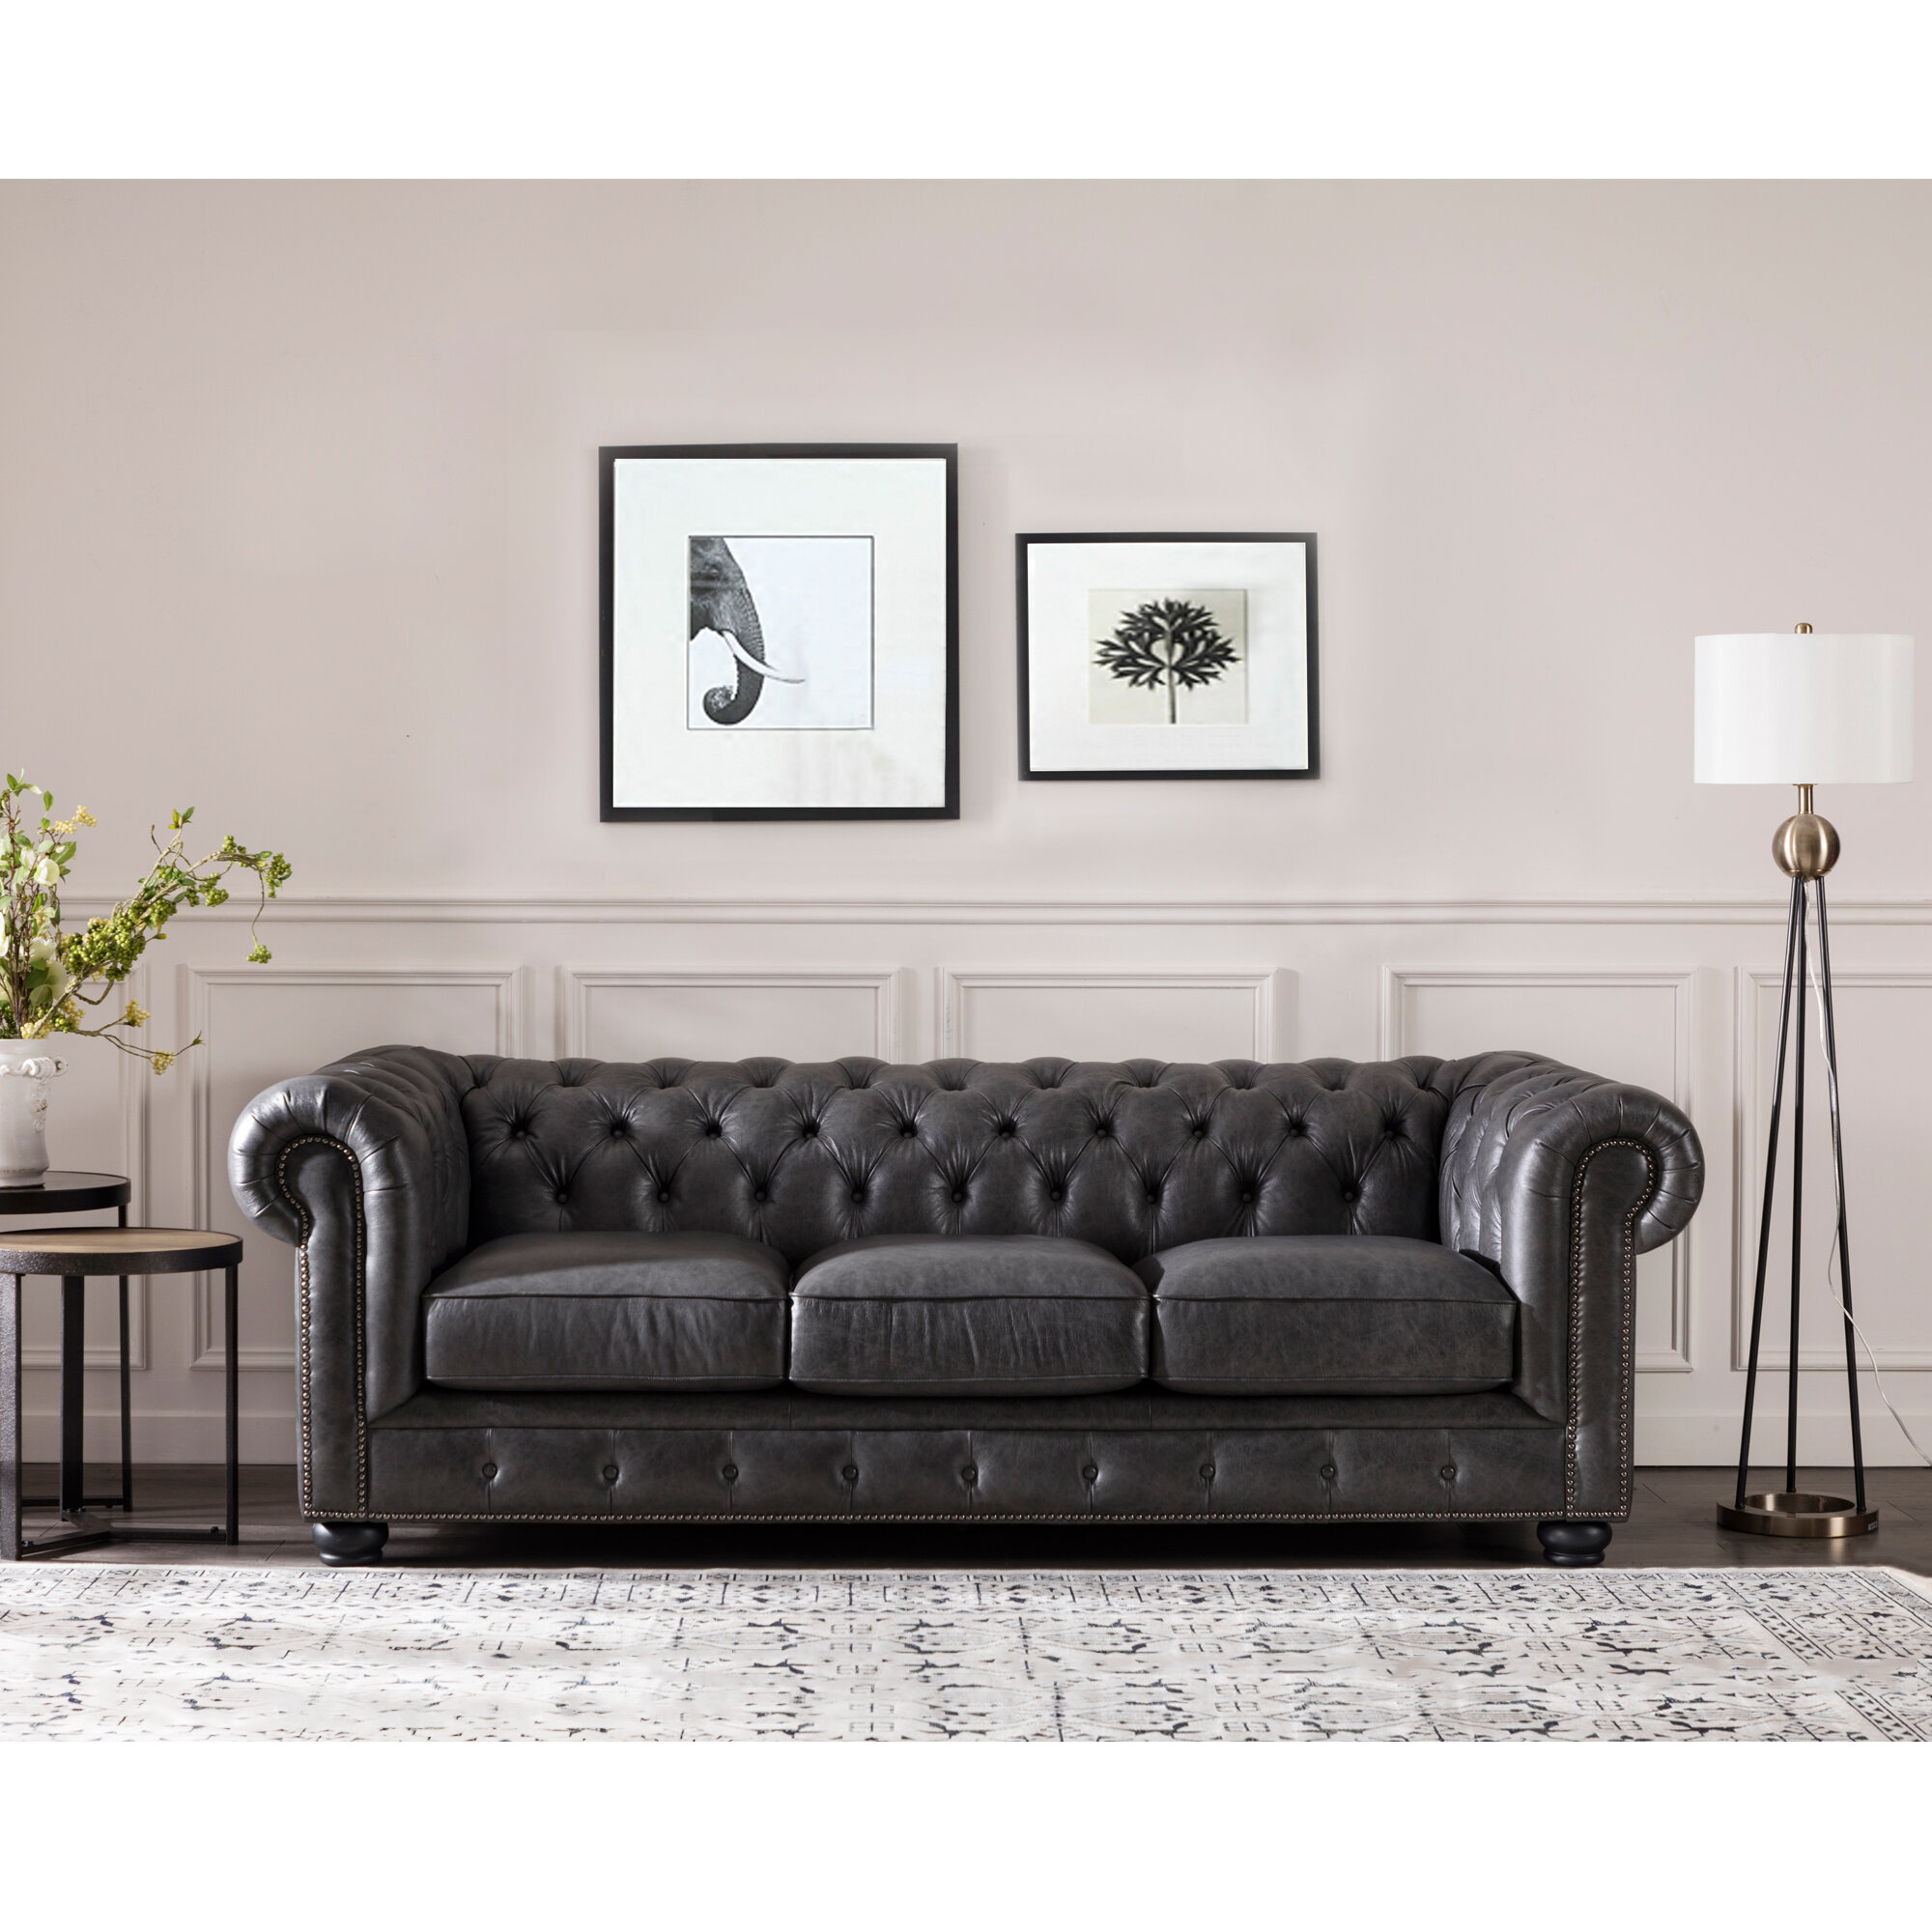 Adelbert 95” Genuine Leather Rolled Arm Chesterfield Sofa